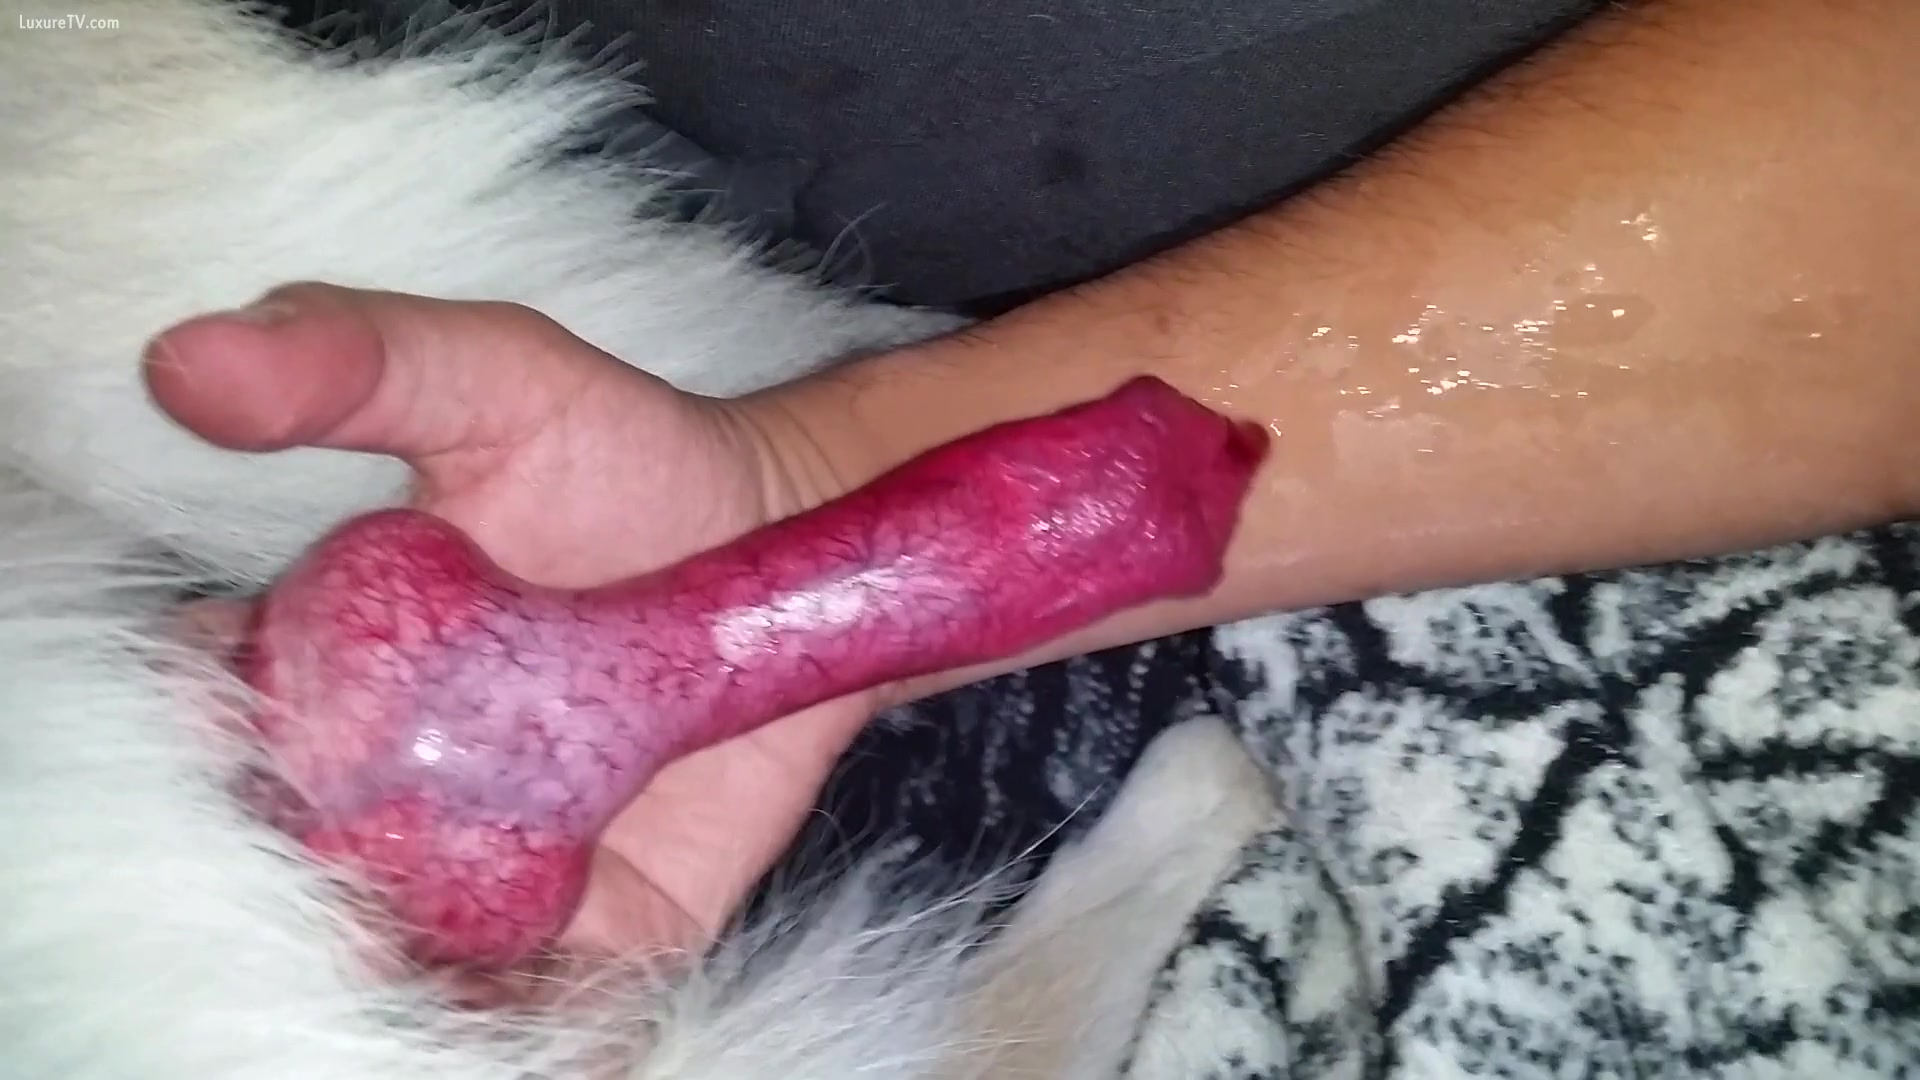 Man gets dick bit off by dog